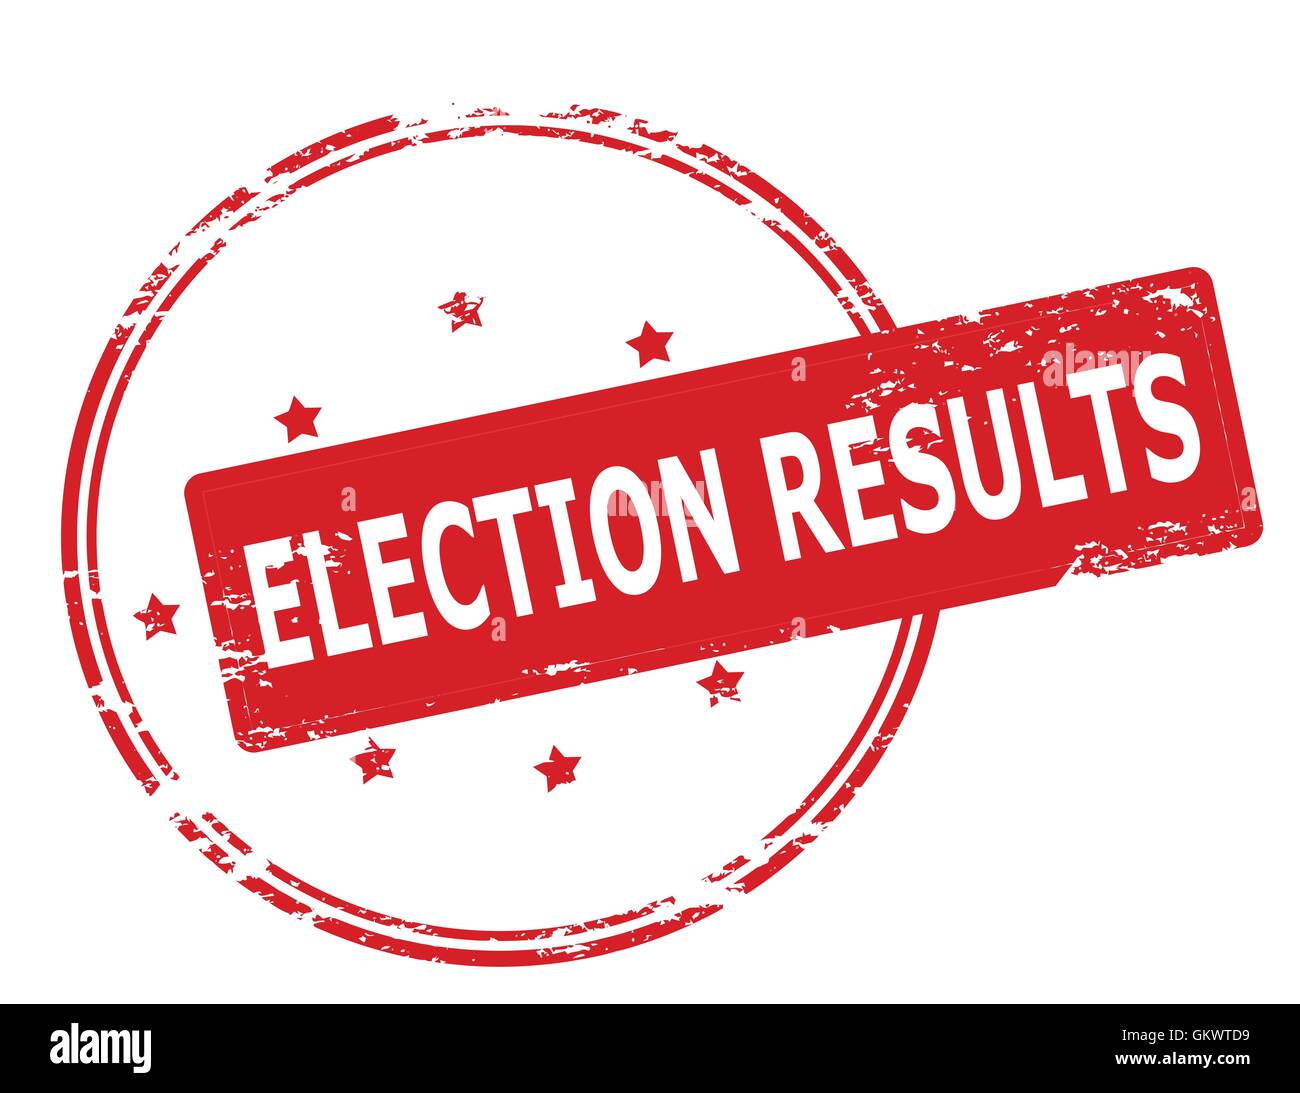 Election results Stock Vector